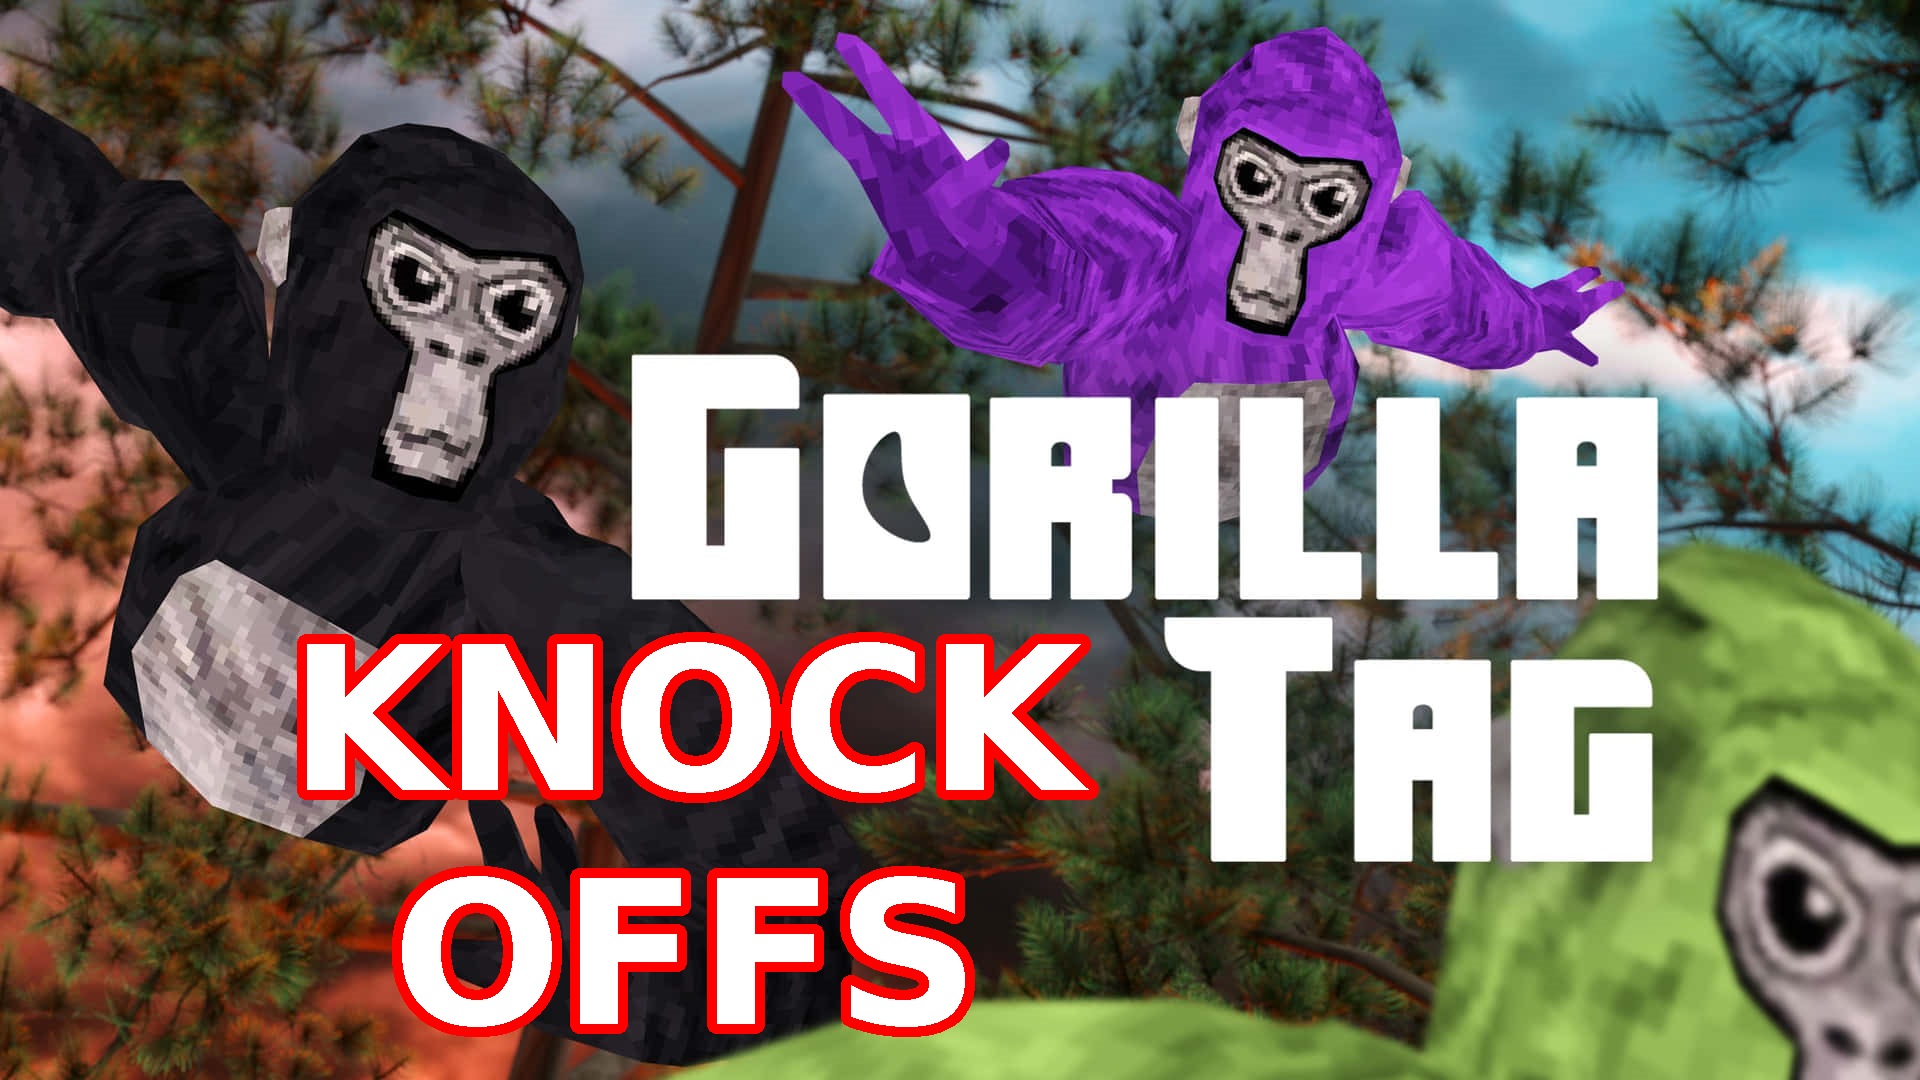 HOW TO GET GORILLA TAG HORROR!! 